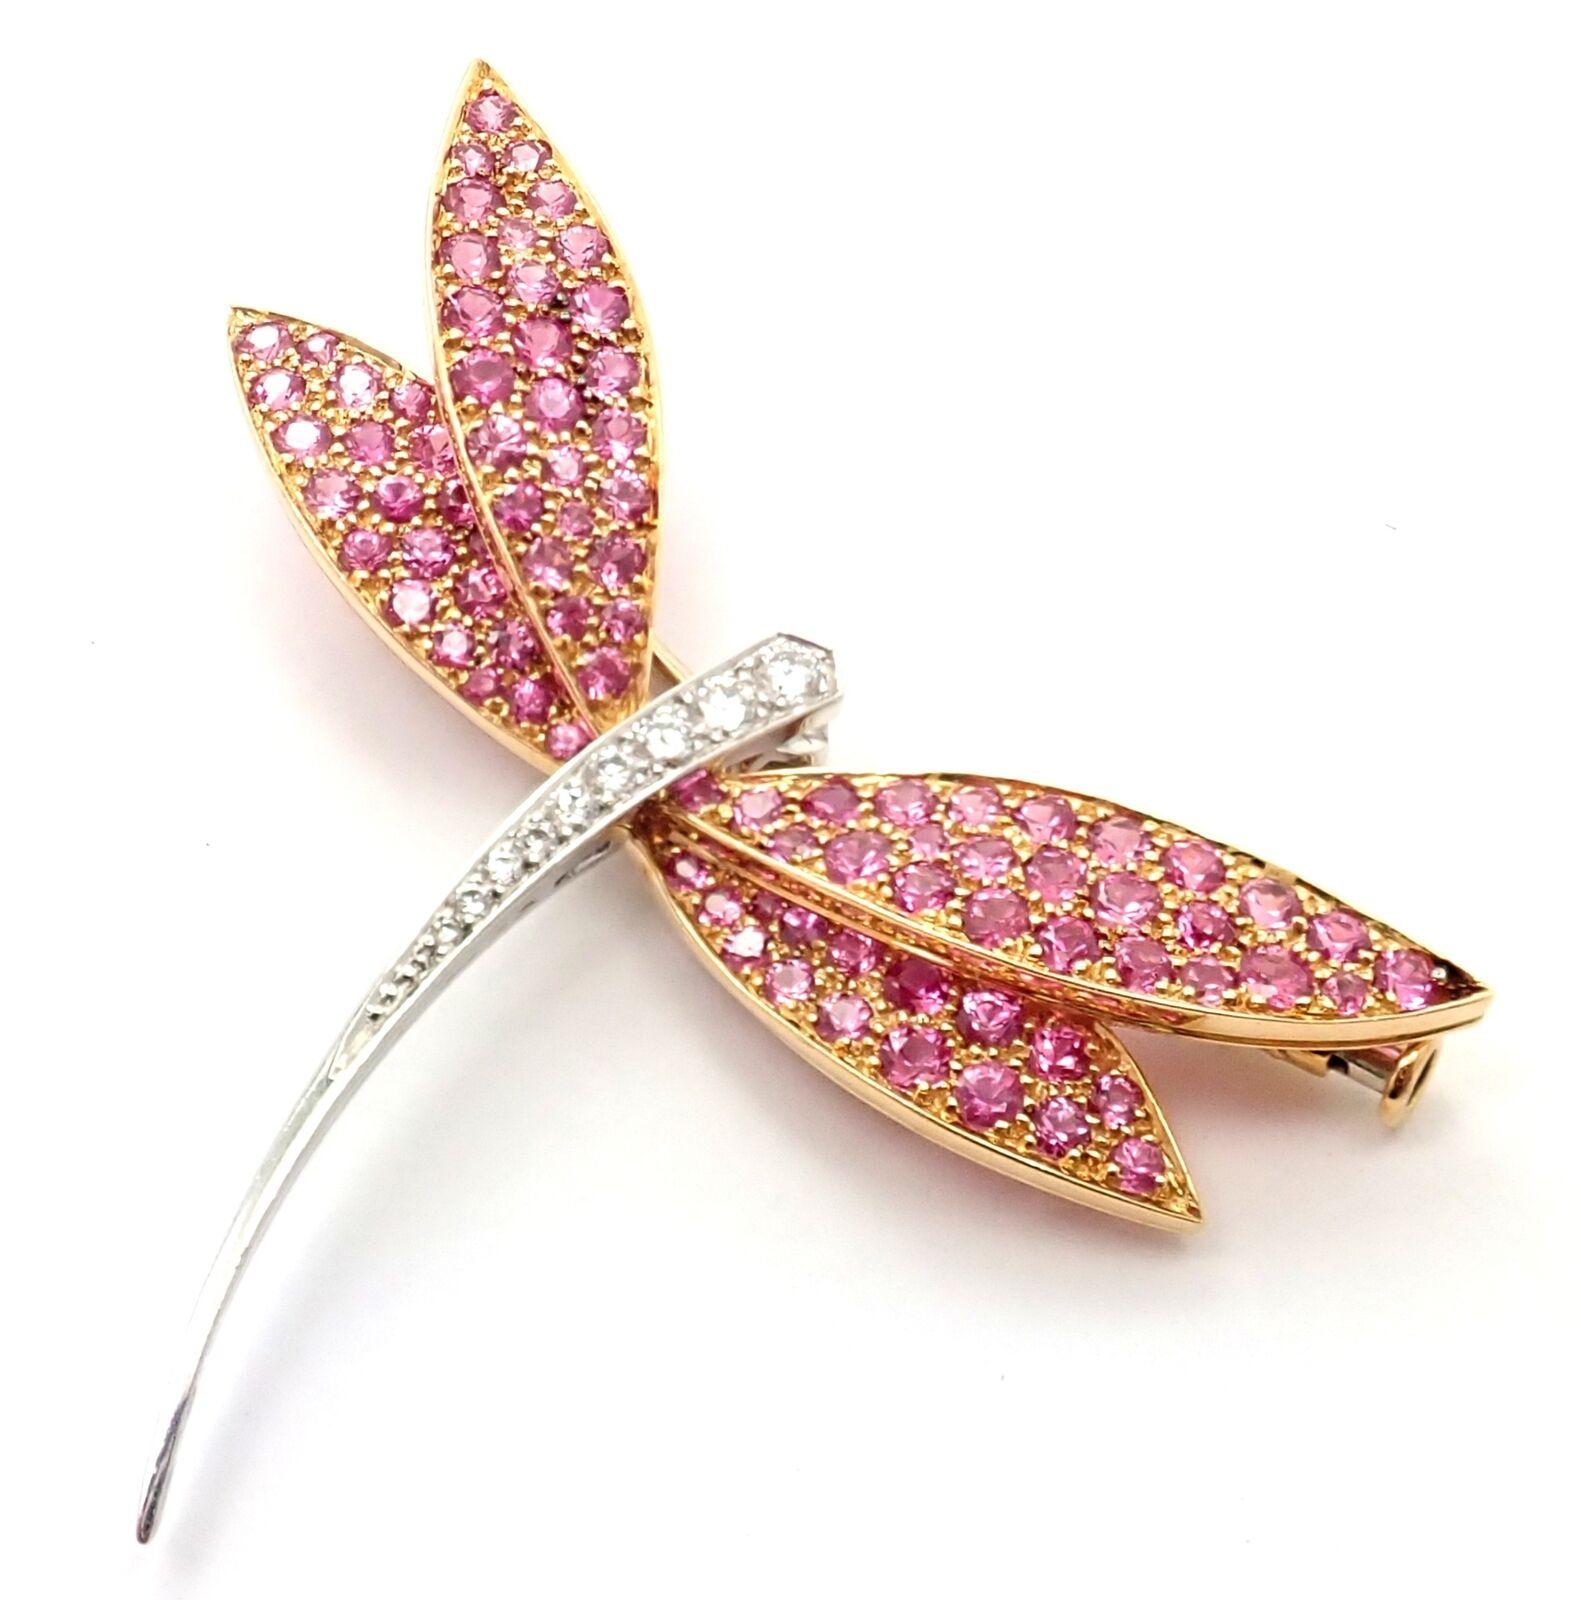 Van Cleef & Arpels Dragonfly Diamond Pink Sapphire White Gold Pin Brooch 5